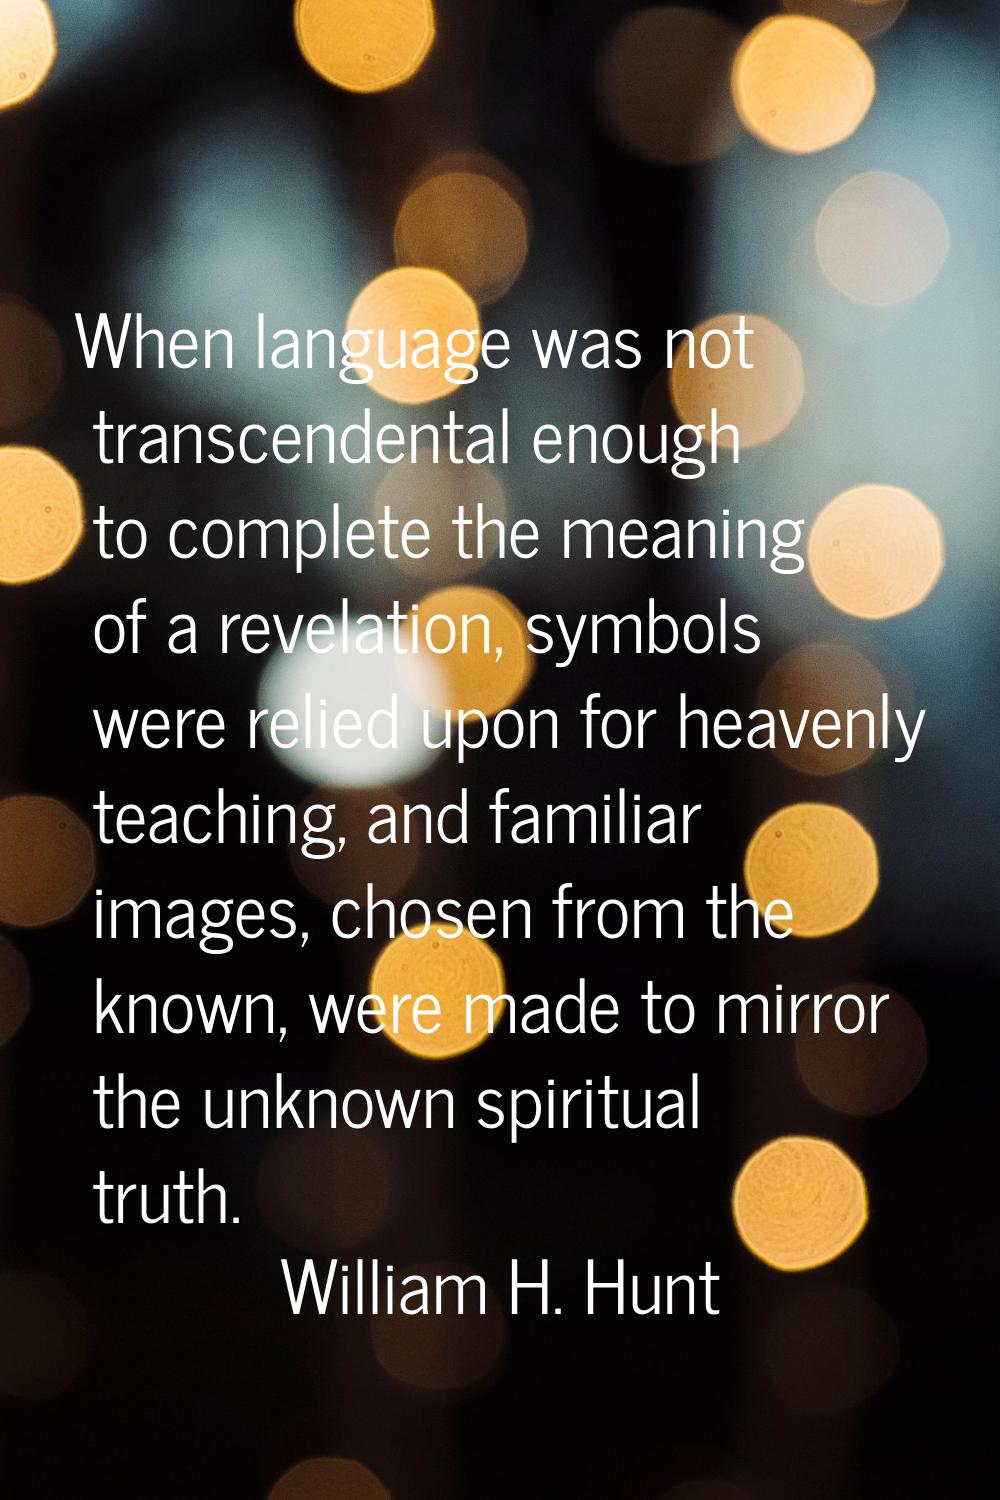 When language was not transcendental enough to complete the meaning of a revelation, symbols were r